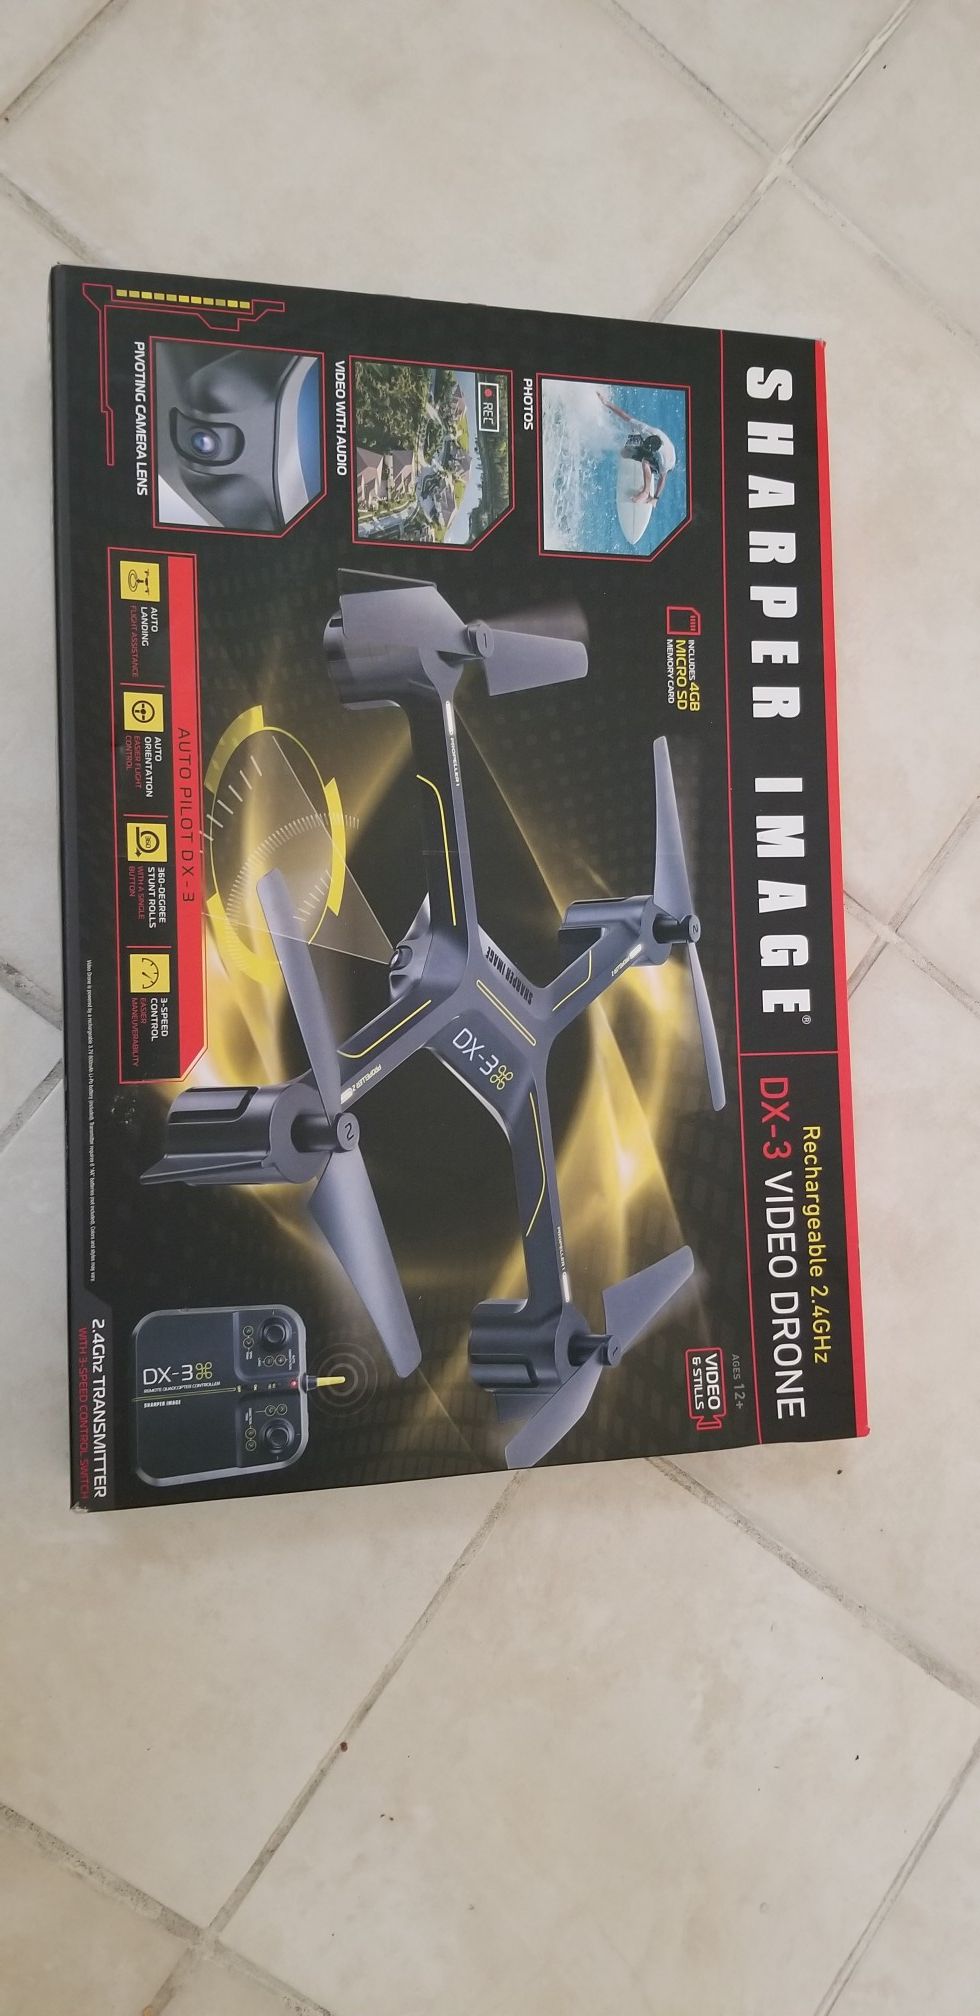 Sharper Image Like New Dx3 Drone w/memory chip